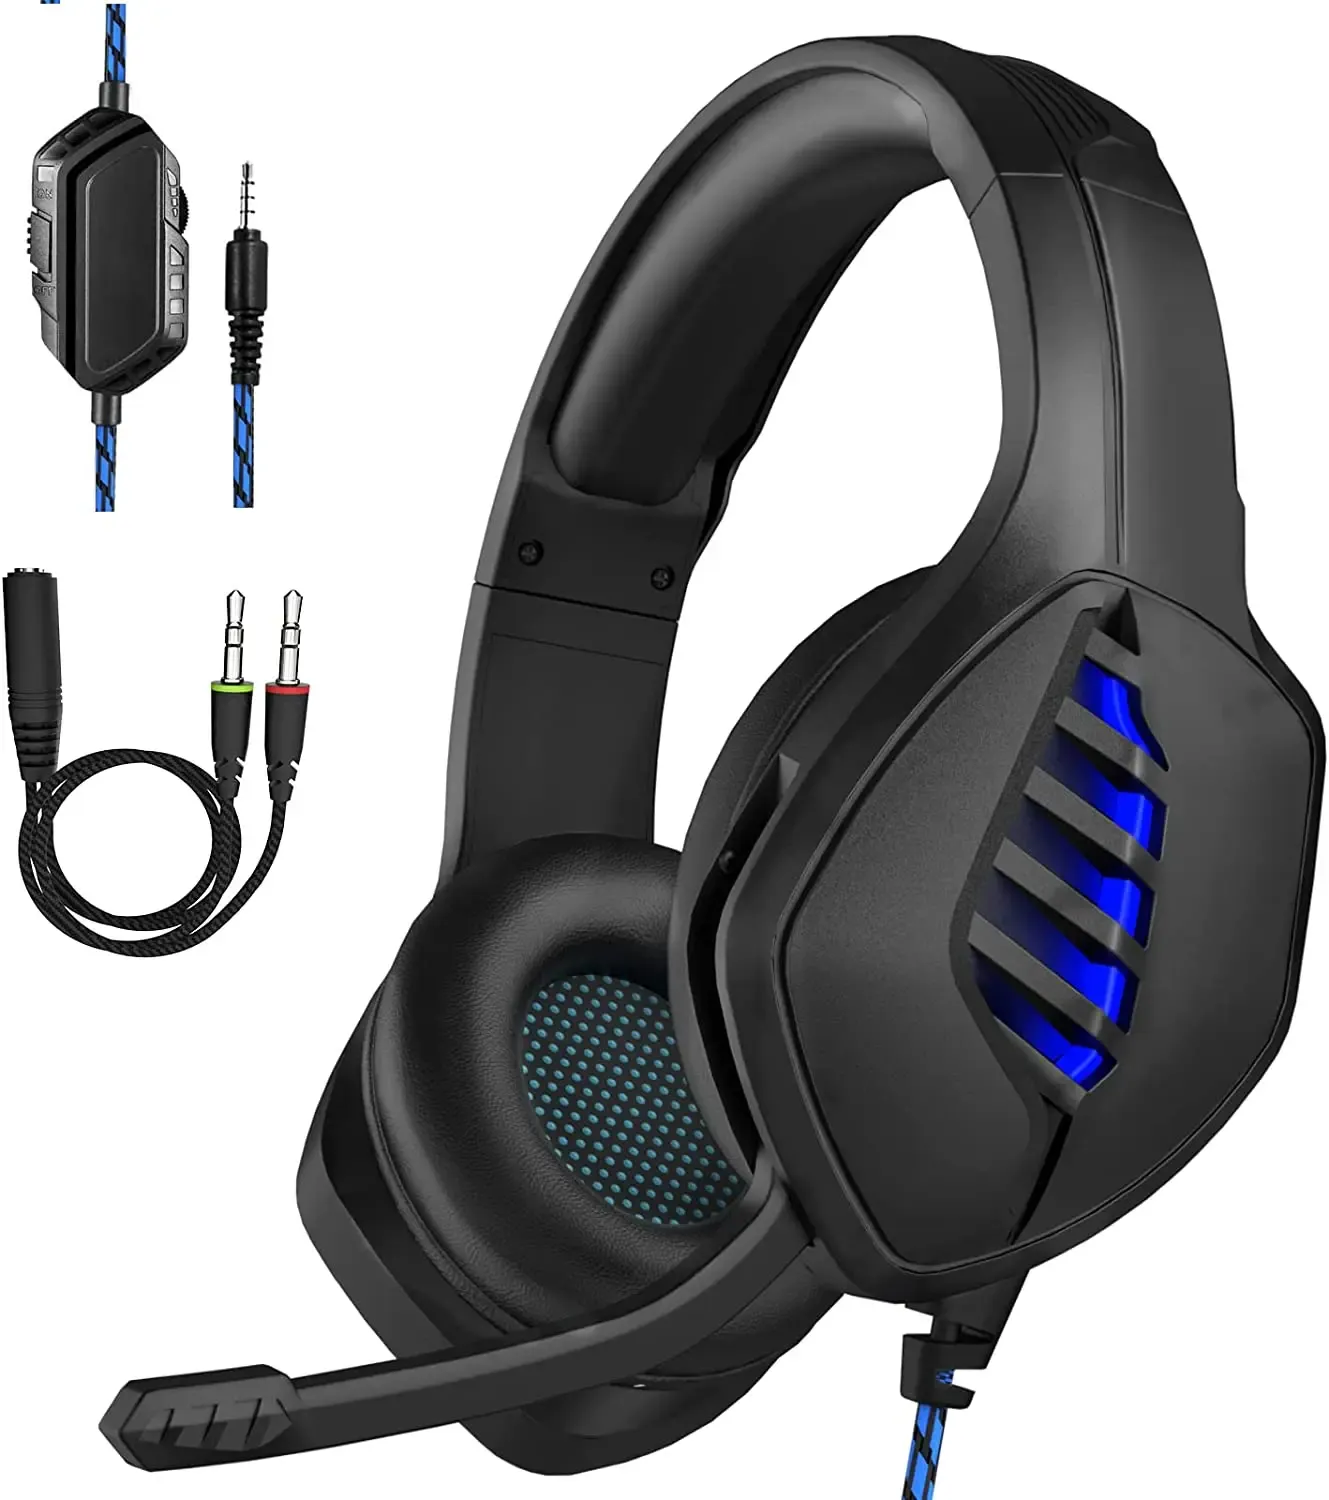 Headphones TARGEAL Gaming Headset with Microphone for PC, PS4, PS5, Switch, Xbox One, Xbox Series X|S 3.5mm Jack Gamer Headphone with N